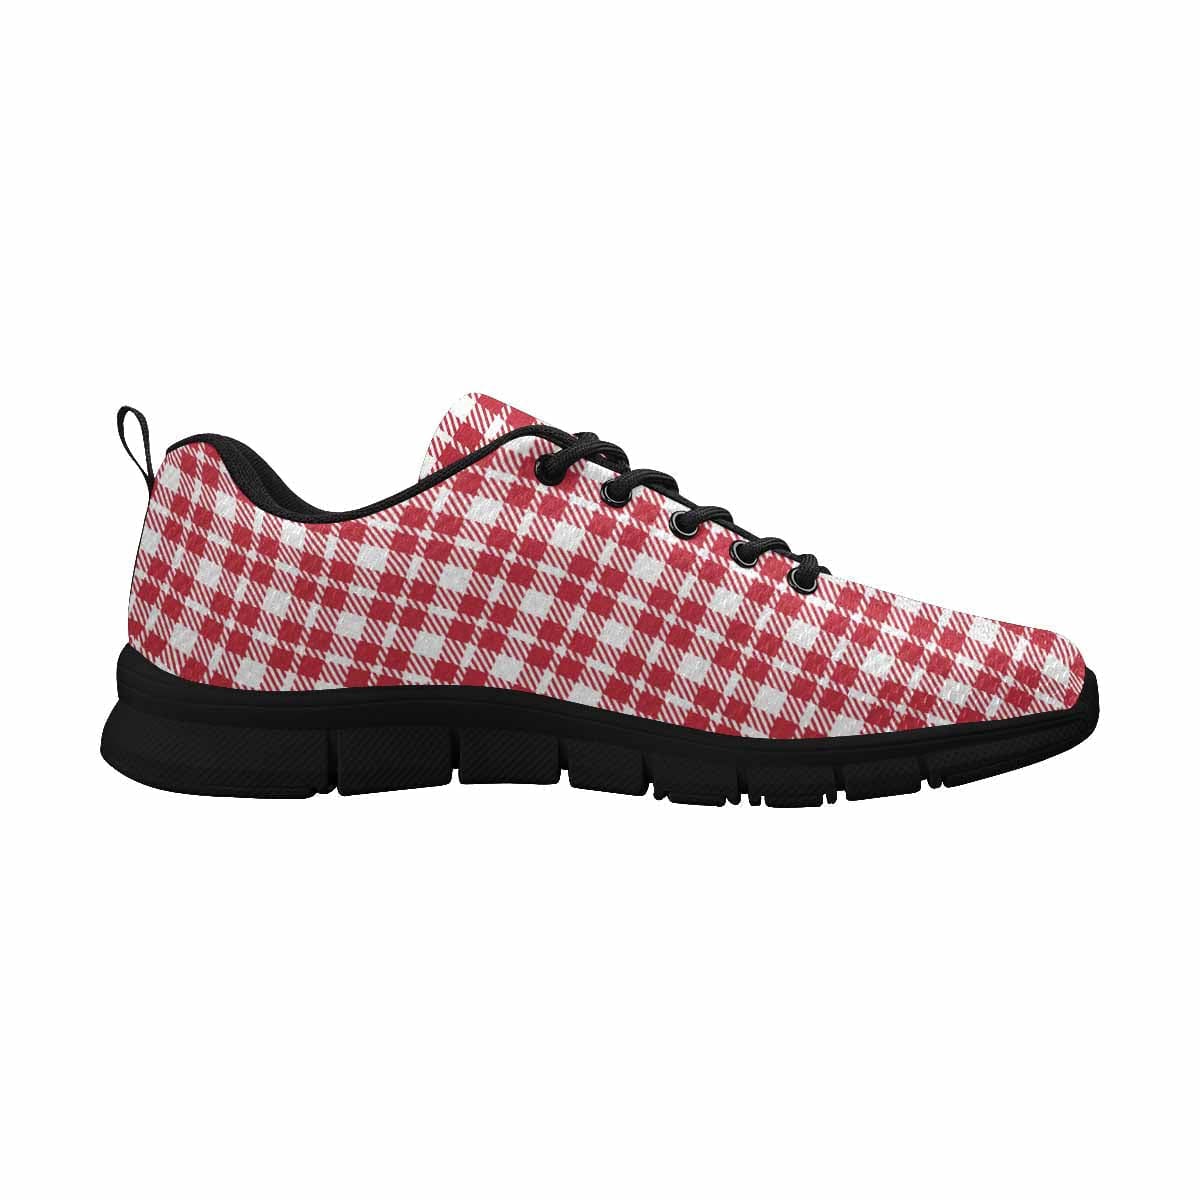 Sneakers For Men Buffalo Plaid Red And White - Running Shoes Dg860 - Mens